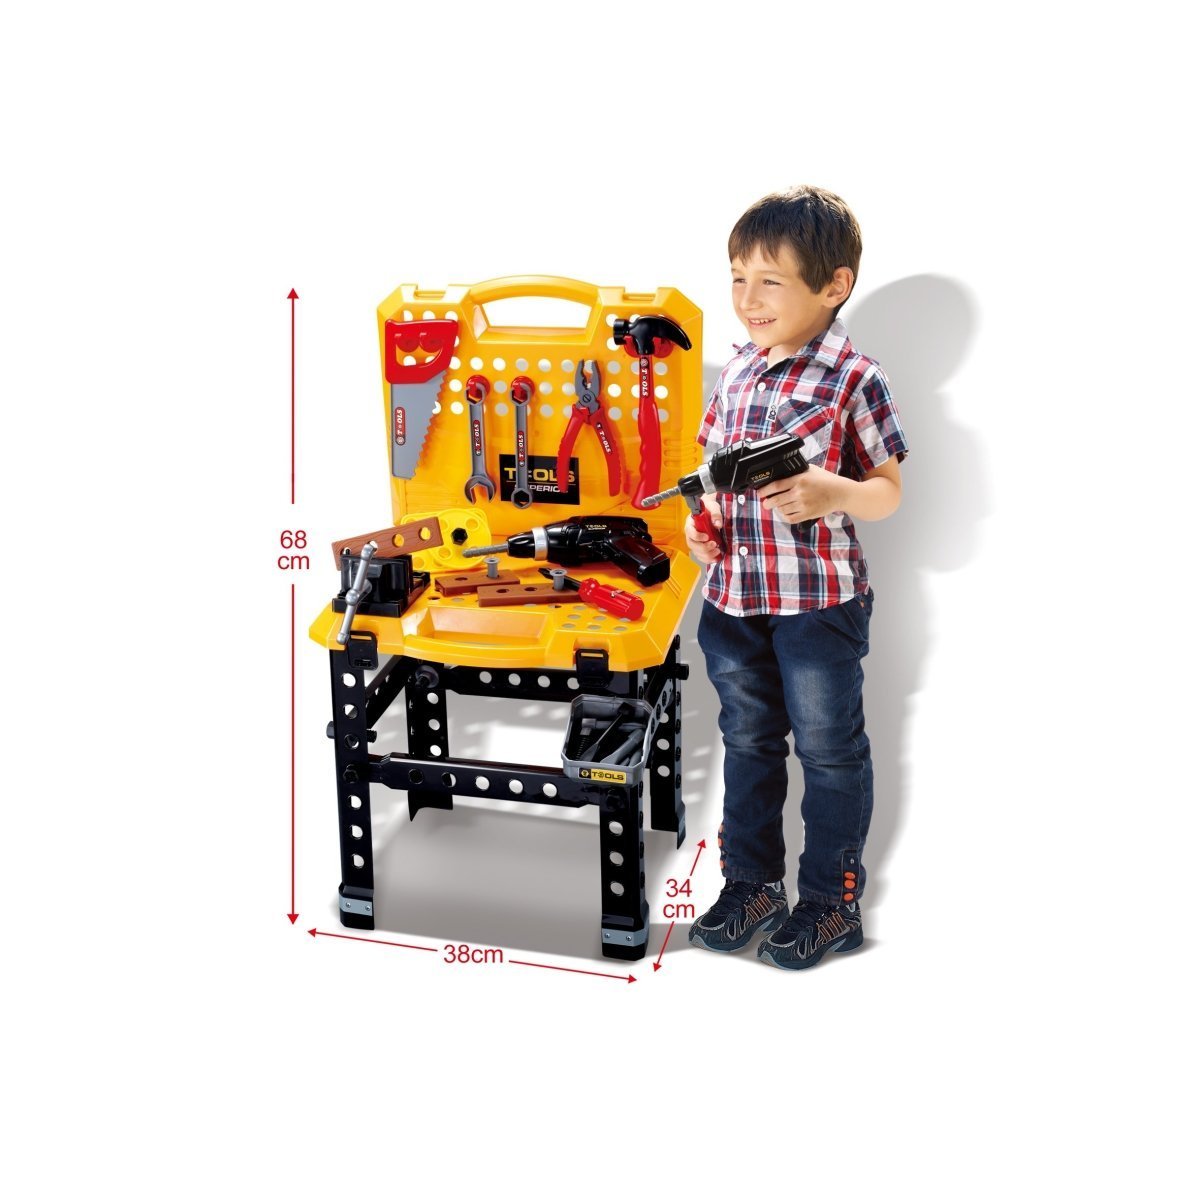 Toy Power Workbench, Kids Power Tool Bench Construction Set with Tools and Electric Drill - Little Kids Business